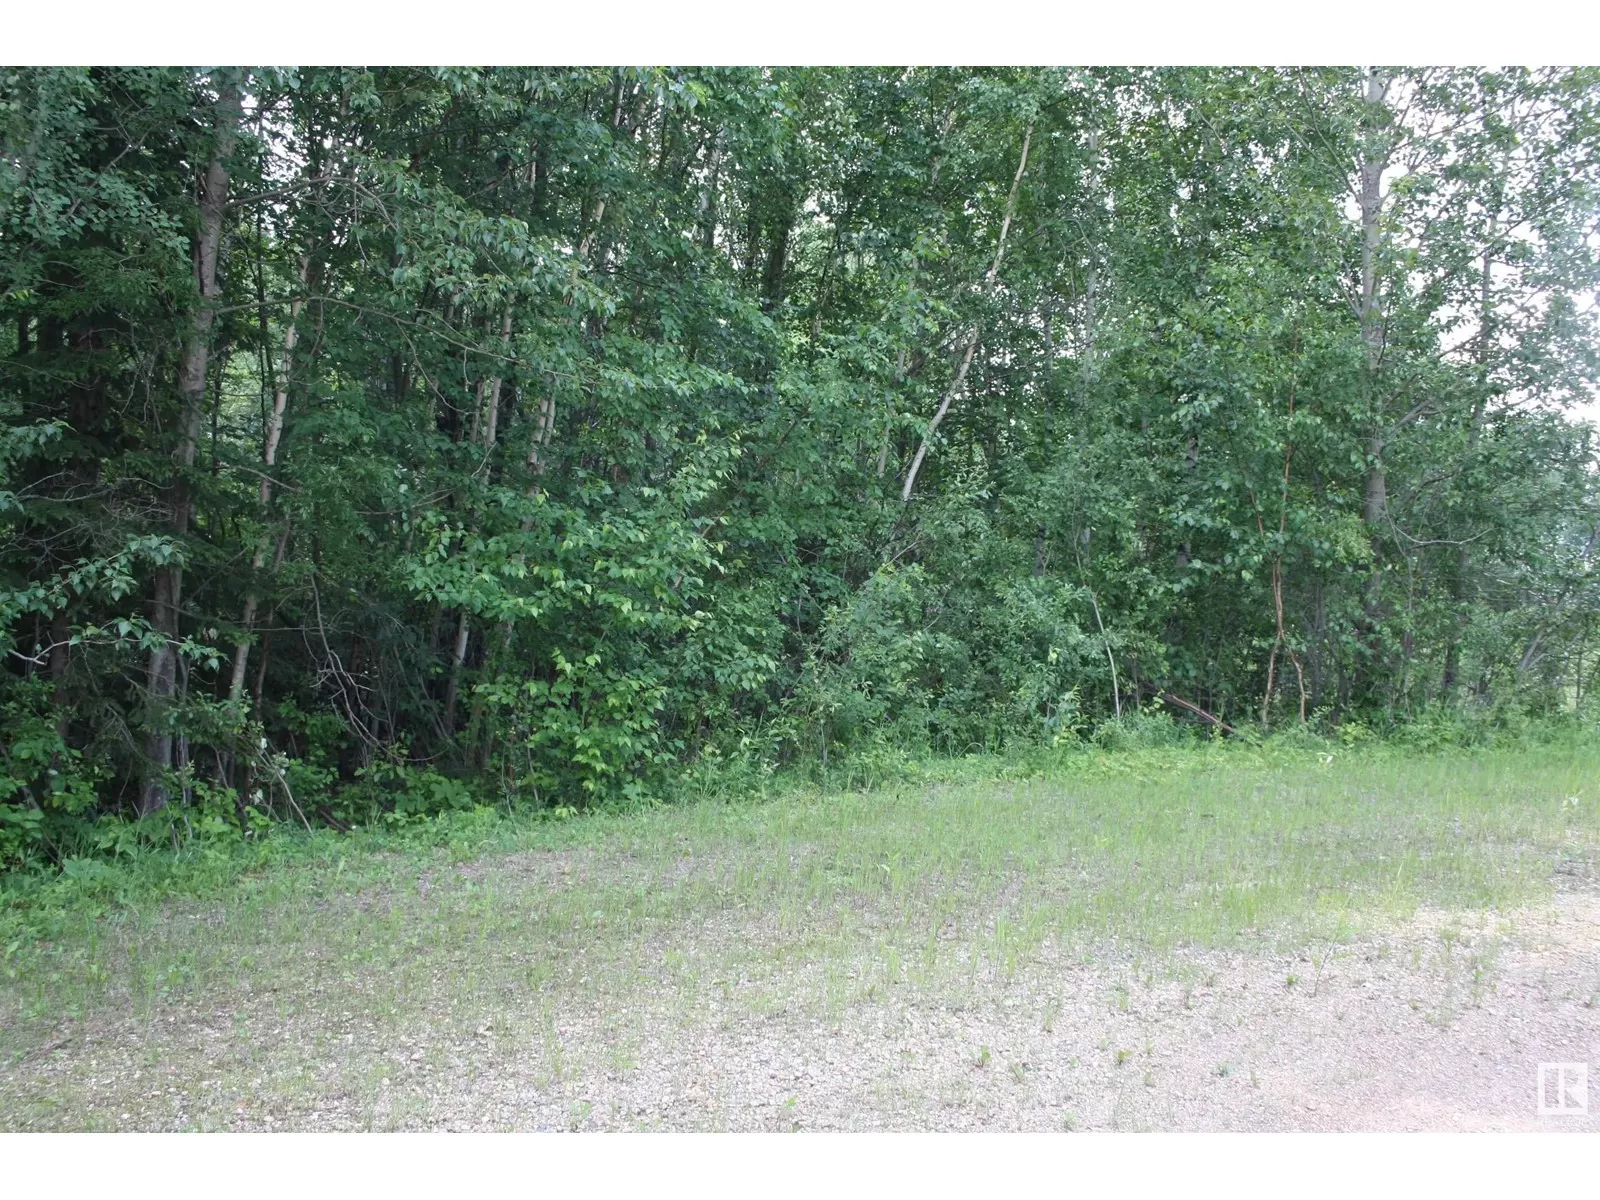 No Building for rent: 1 652051 Rng Rd 224, Rural Athabasca County, Alberta T9S 1B9